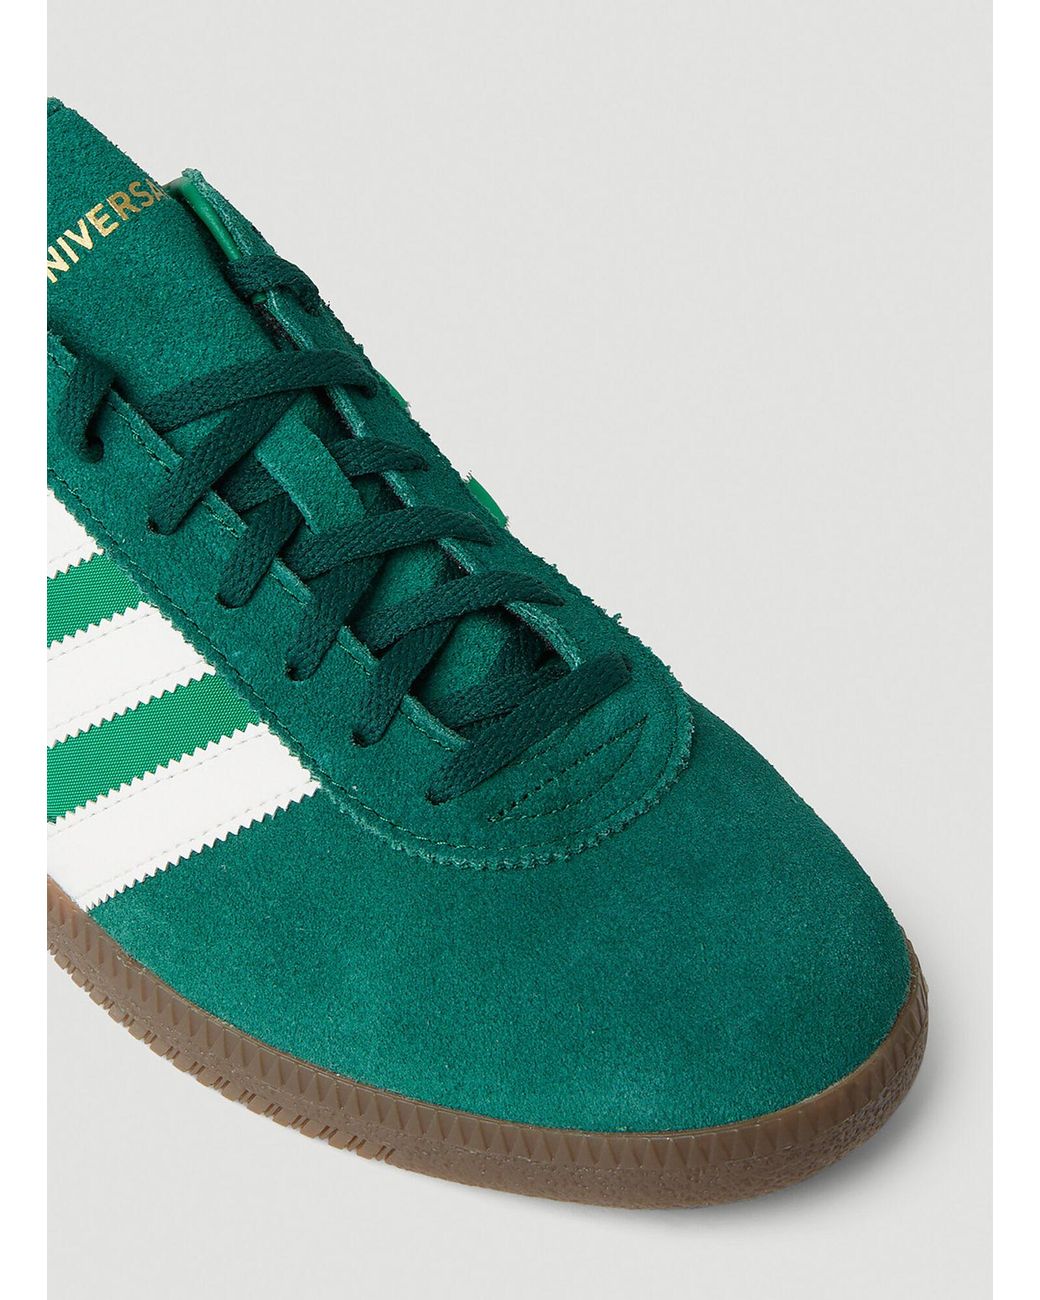 adidas Universal Sneakers in Green for Men | Lyst